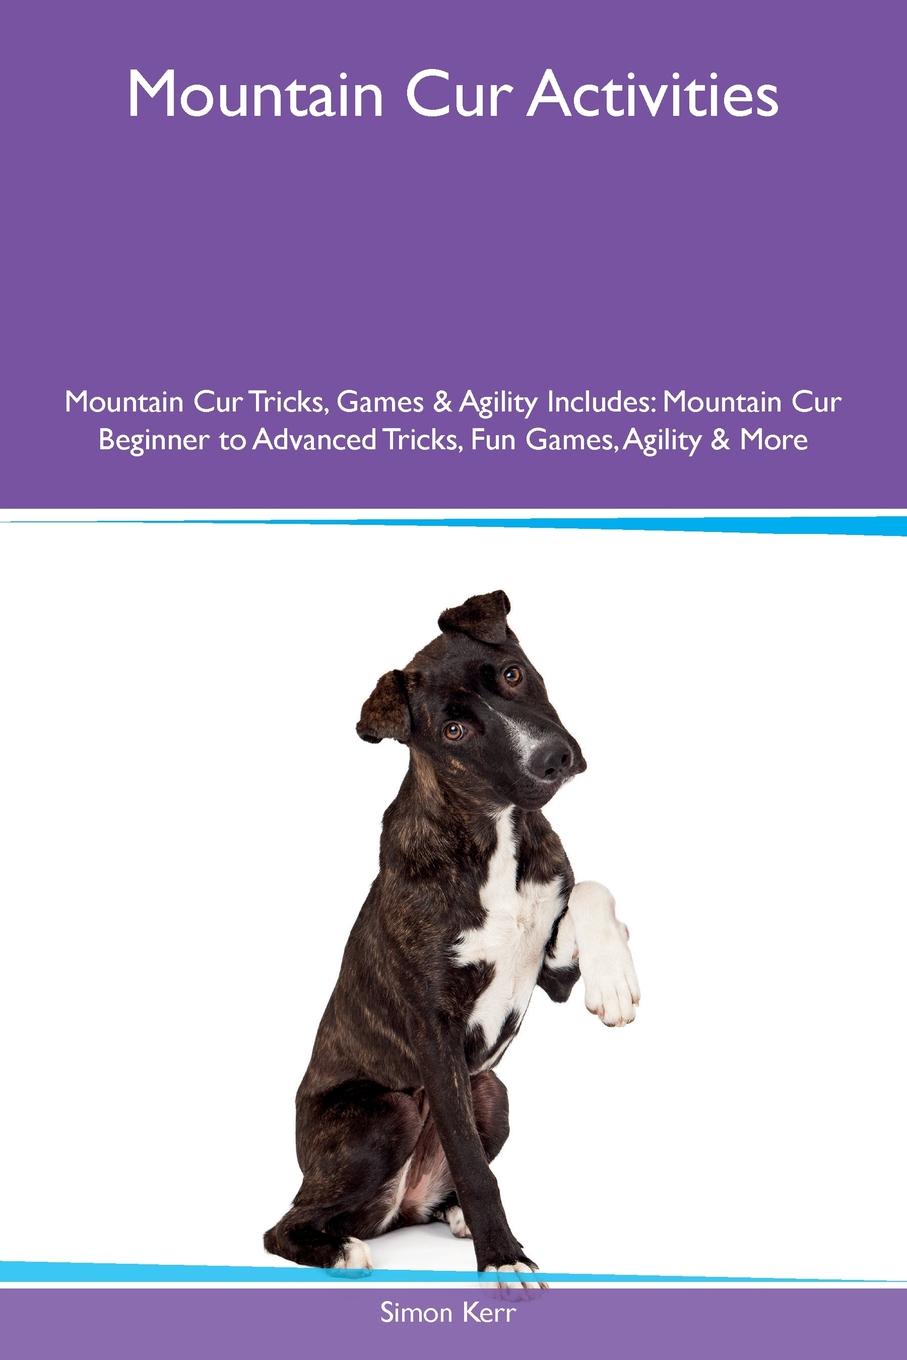 Mountain Cur Activities Mountain Cur Tricks, Games & Agility Includes. Mountain Cur Beginner to Advanced Tricks, Fun Games, Agility & More